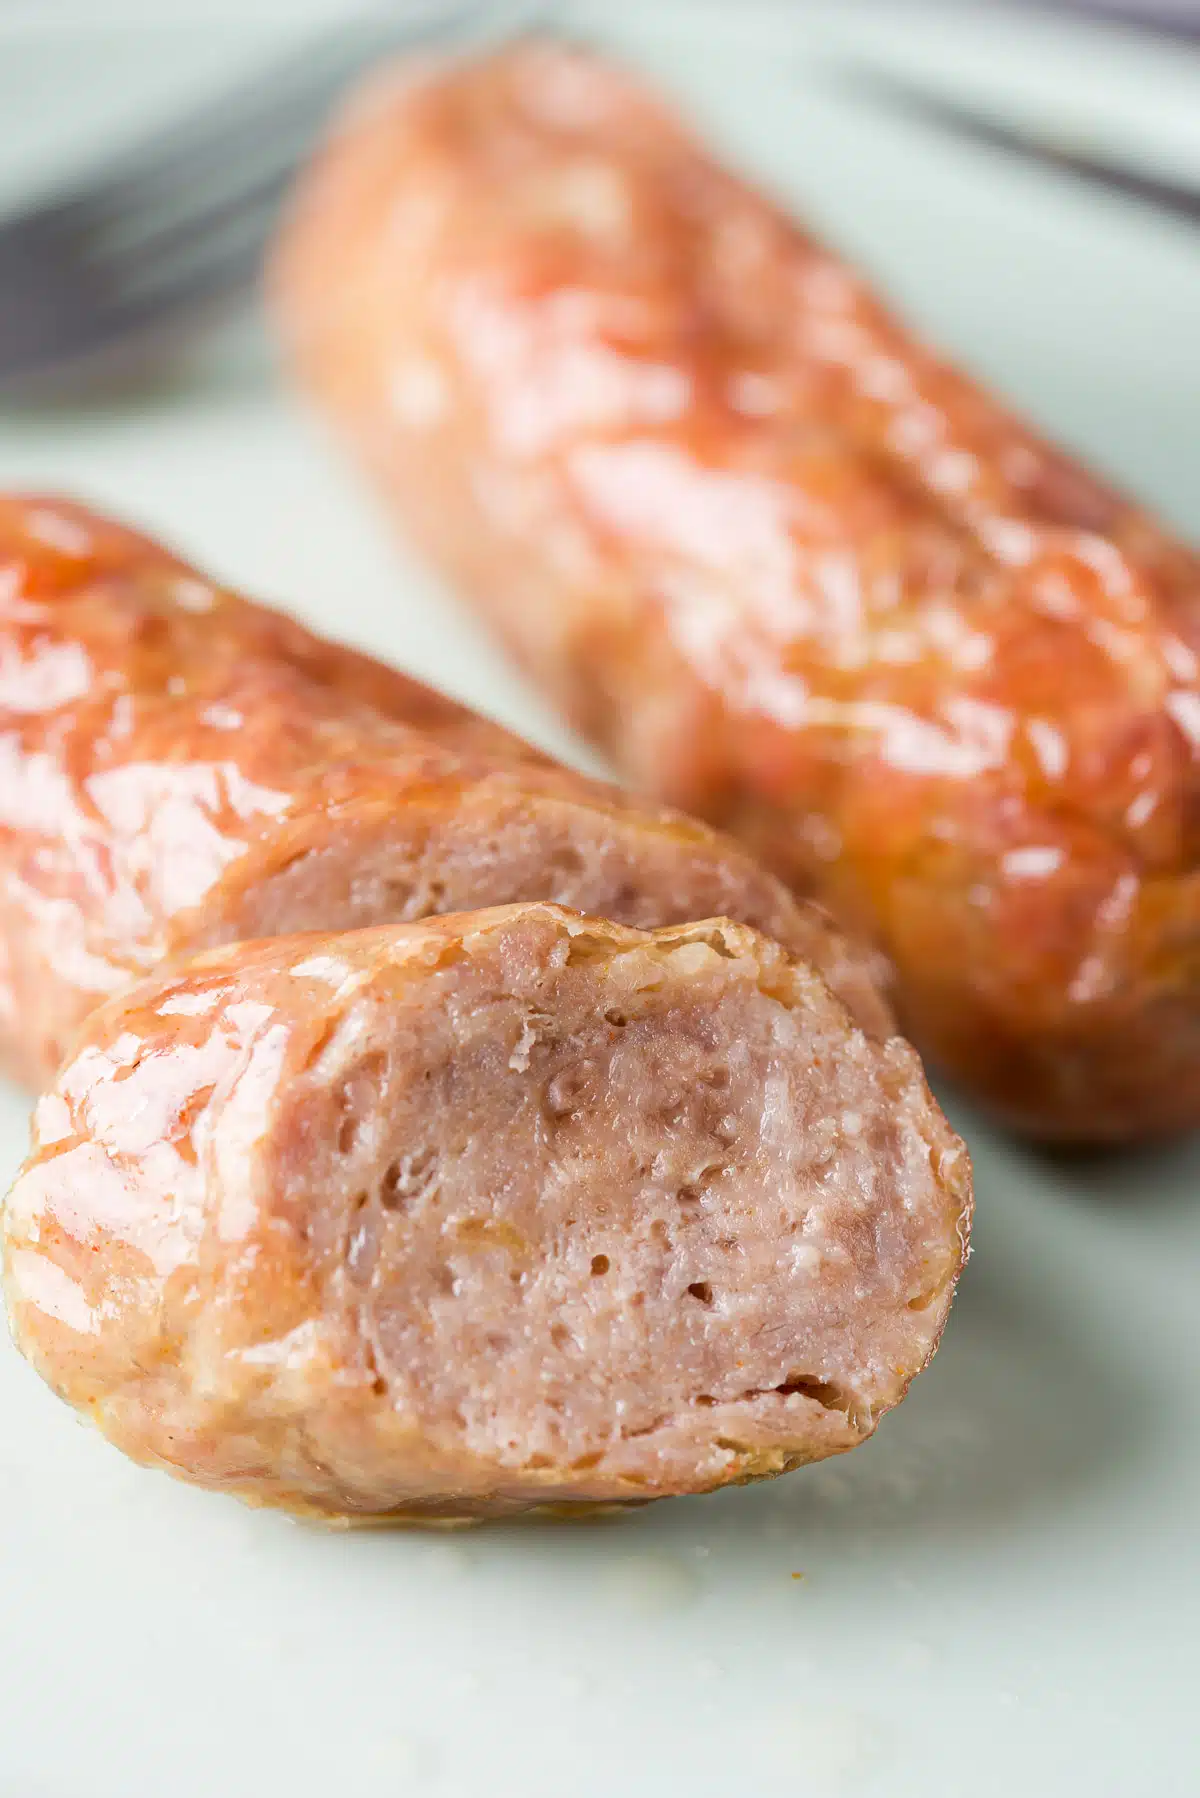 Close up of a slice of sausage on a plate with other sausages